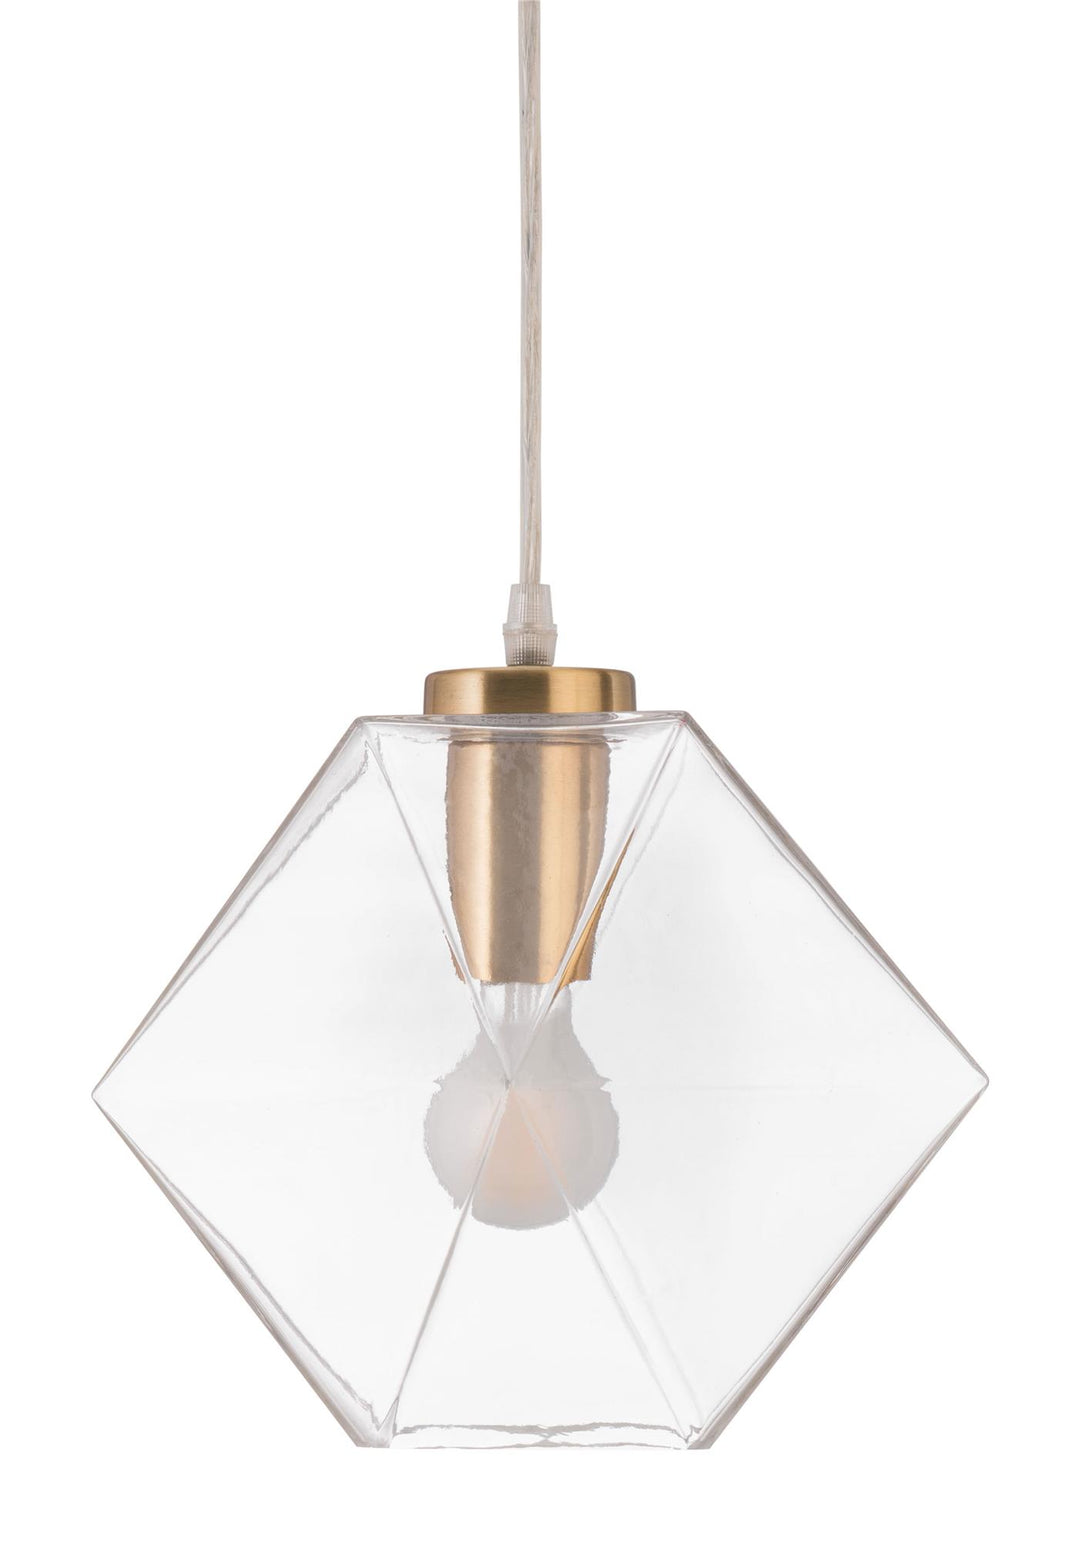 Nancy brand brass lamp for ceiling with fixtures -  N/A